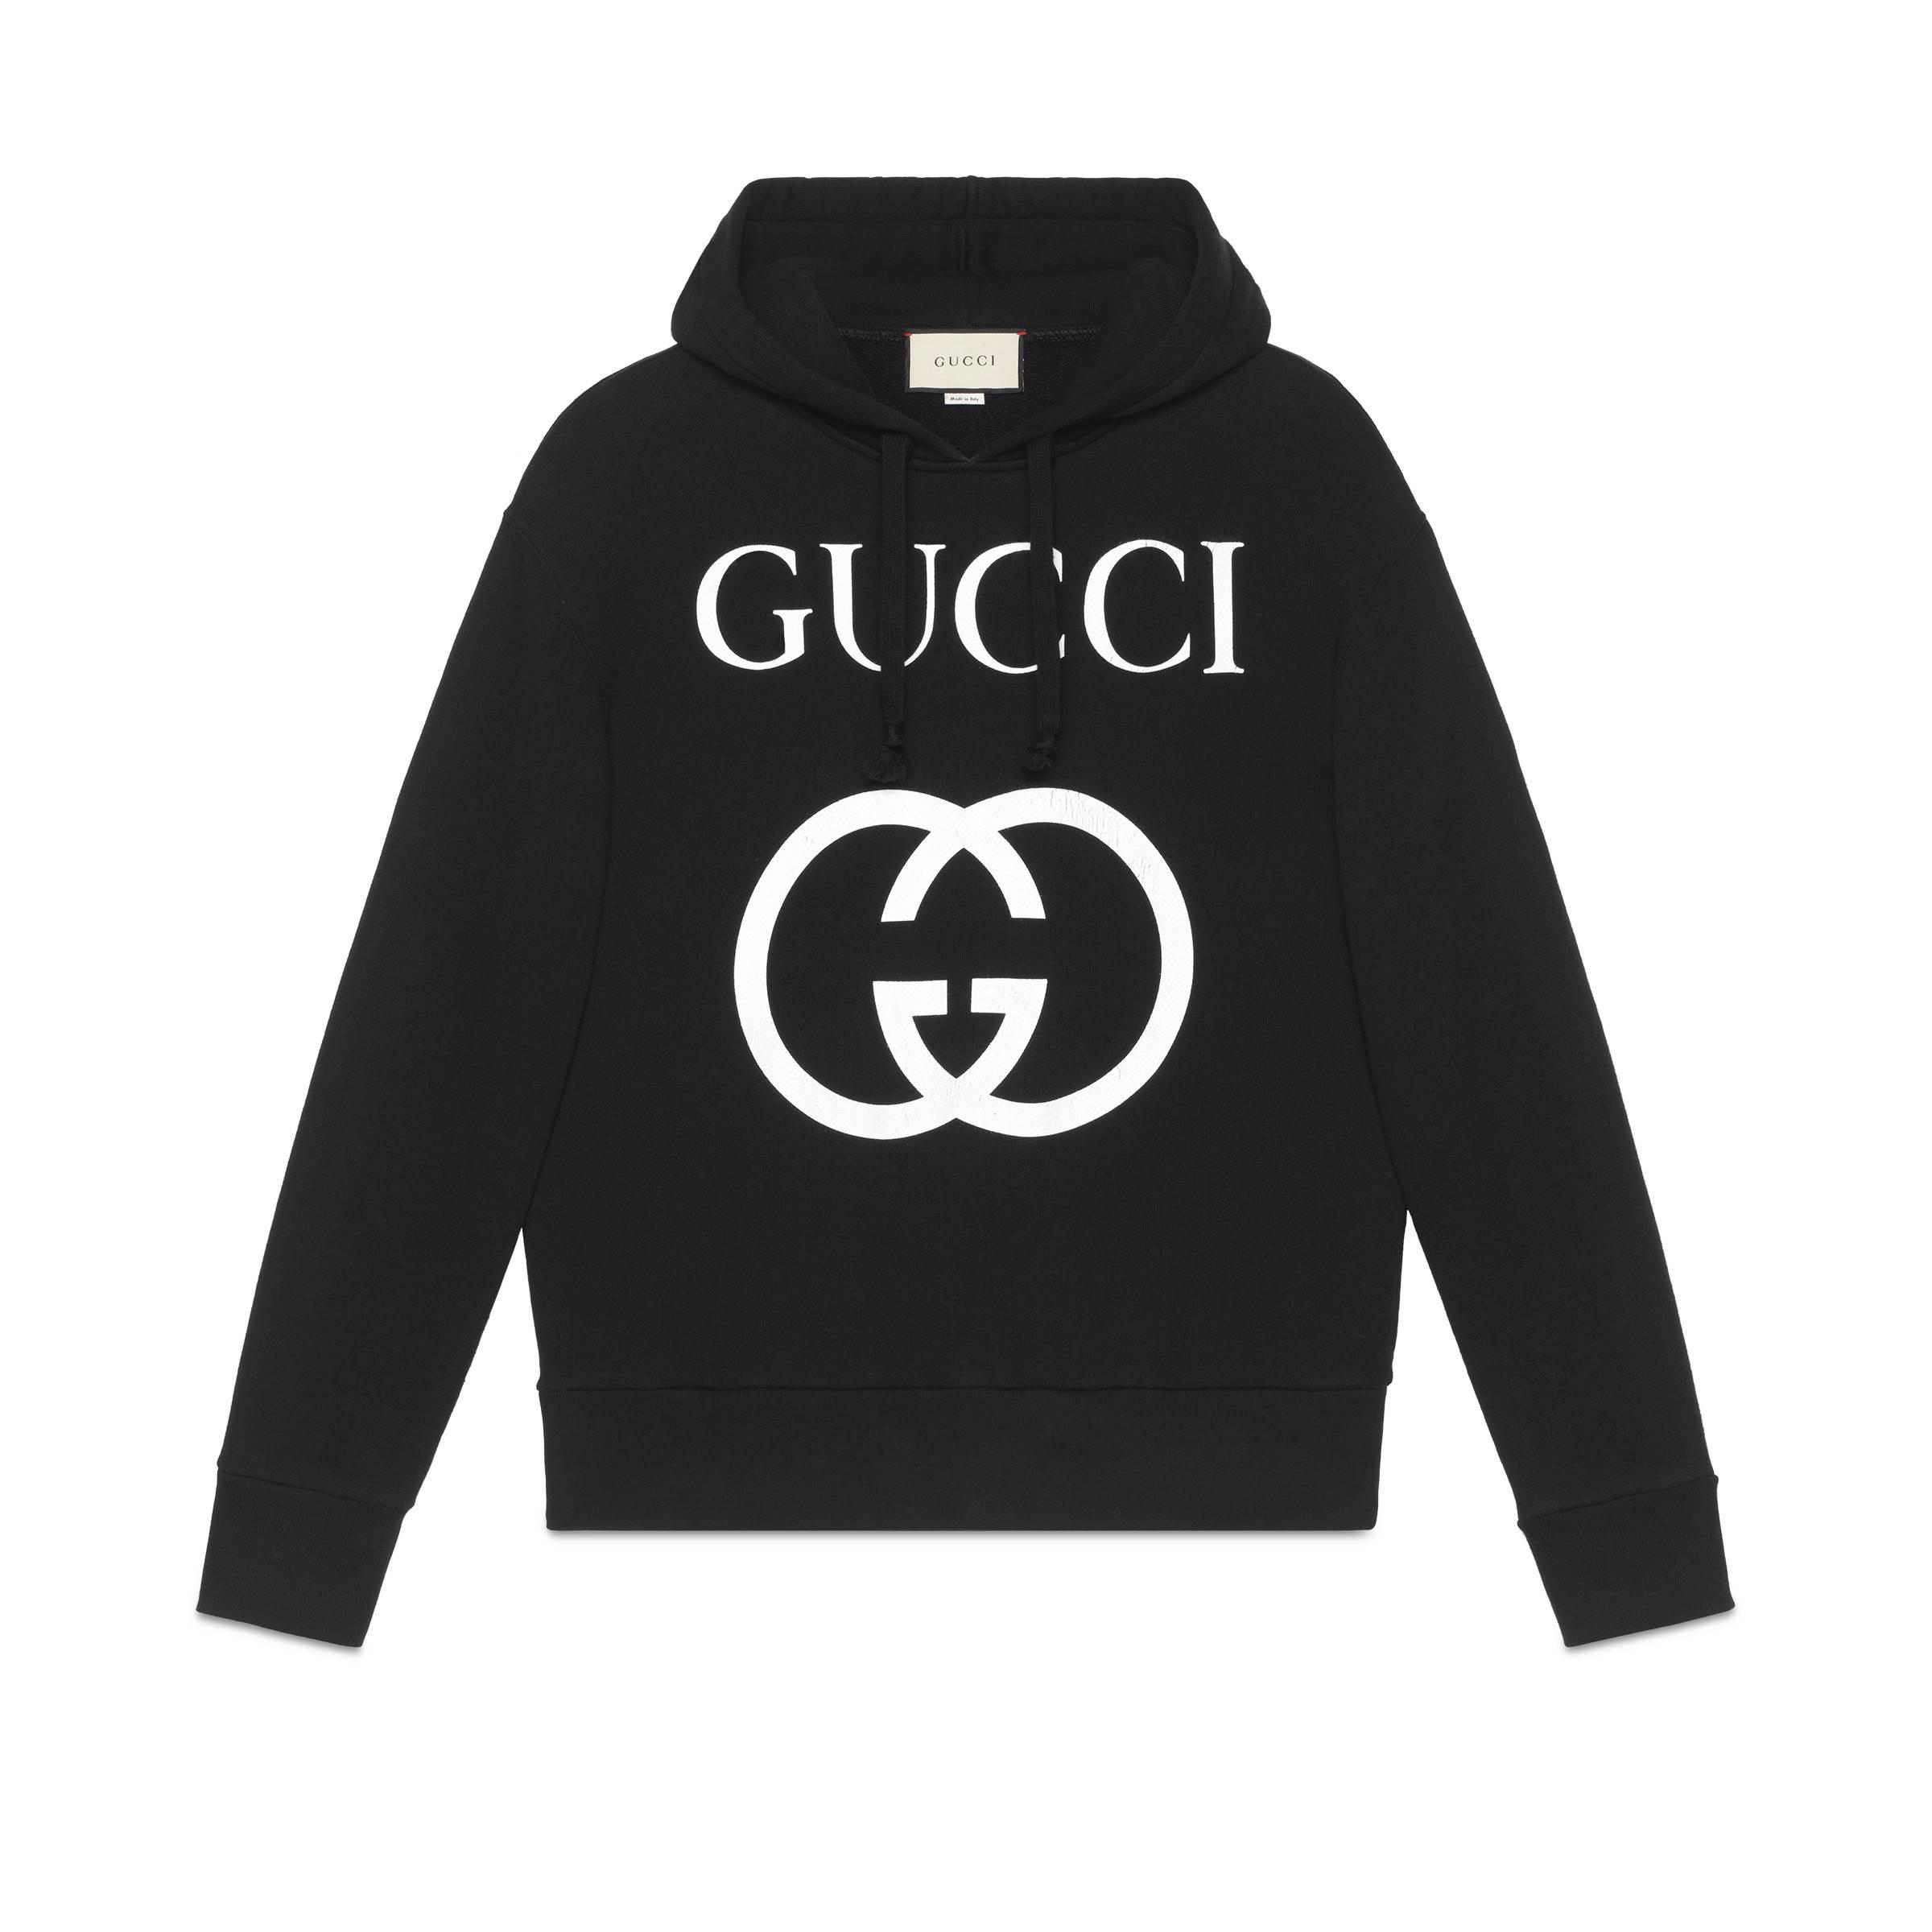 Gucci Gg Loop-back Cotton Hooded Sweatshirt in Black for Men - Save 30% ...